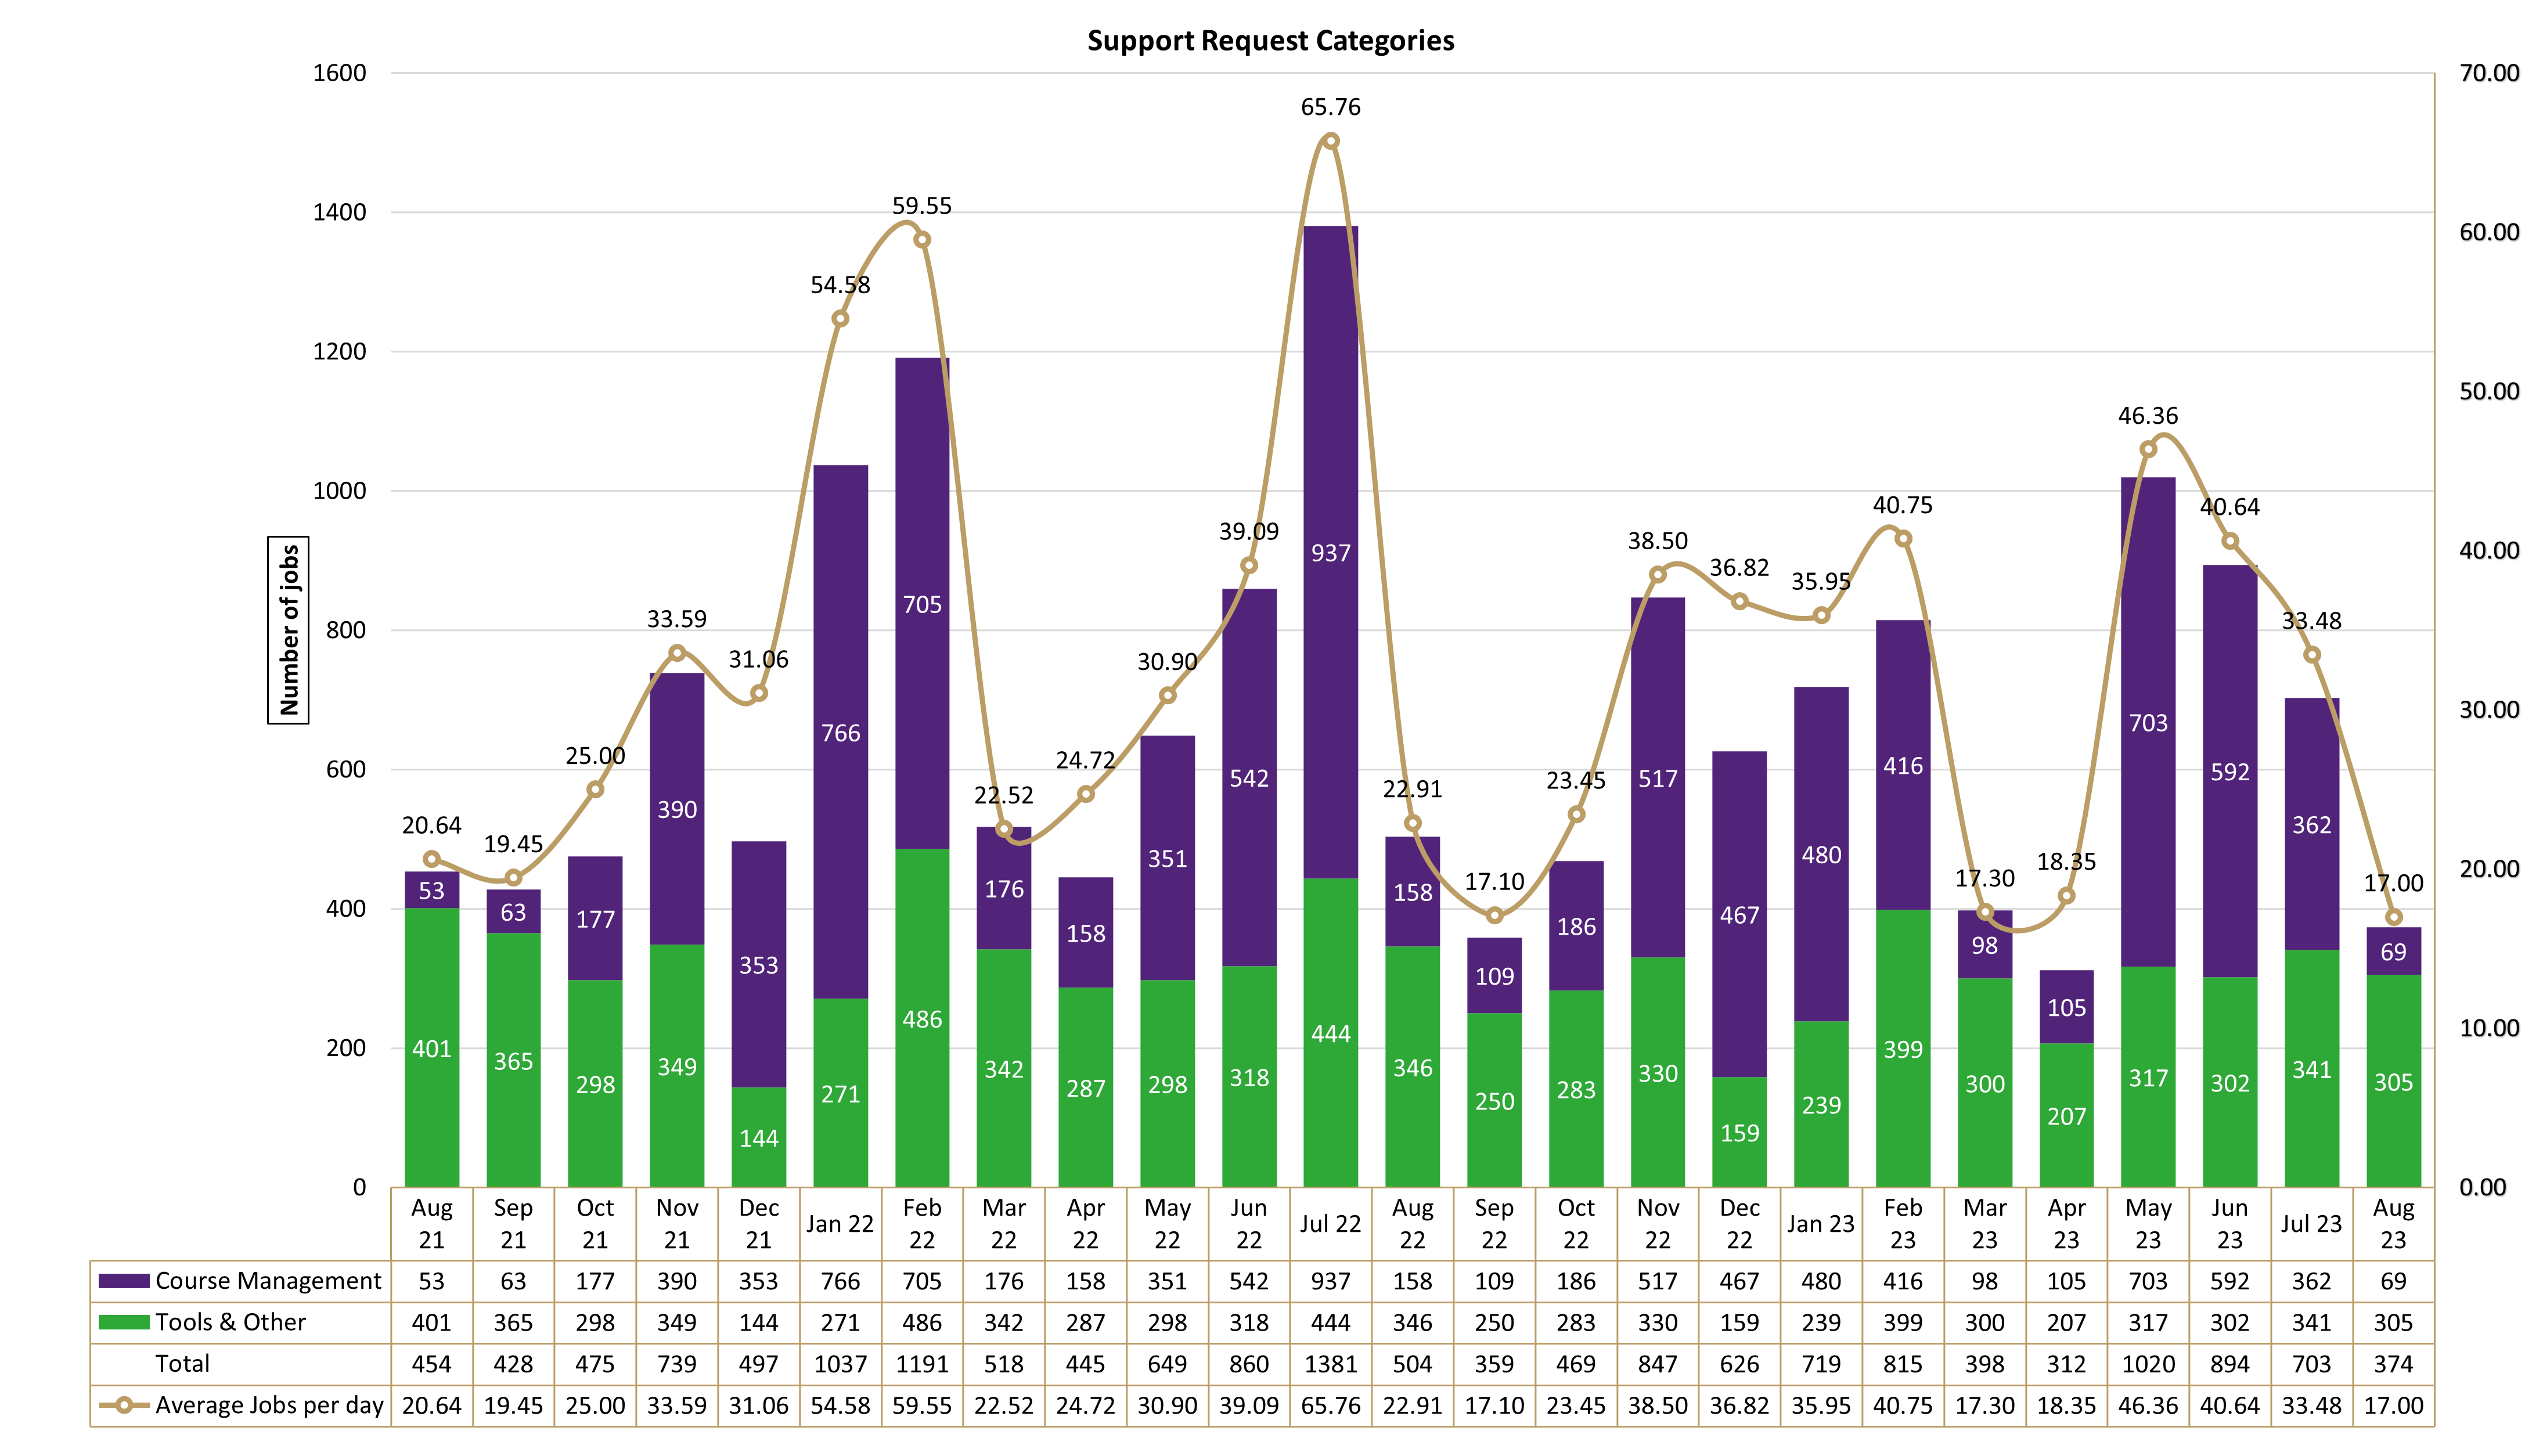 Chart of Support Request Categories from August 2021 to August 2023